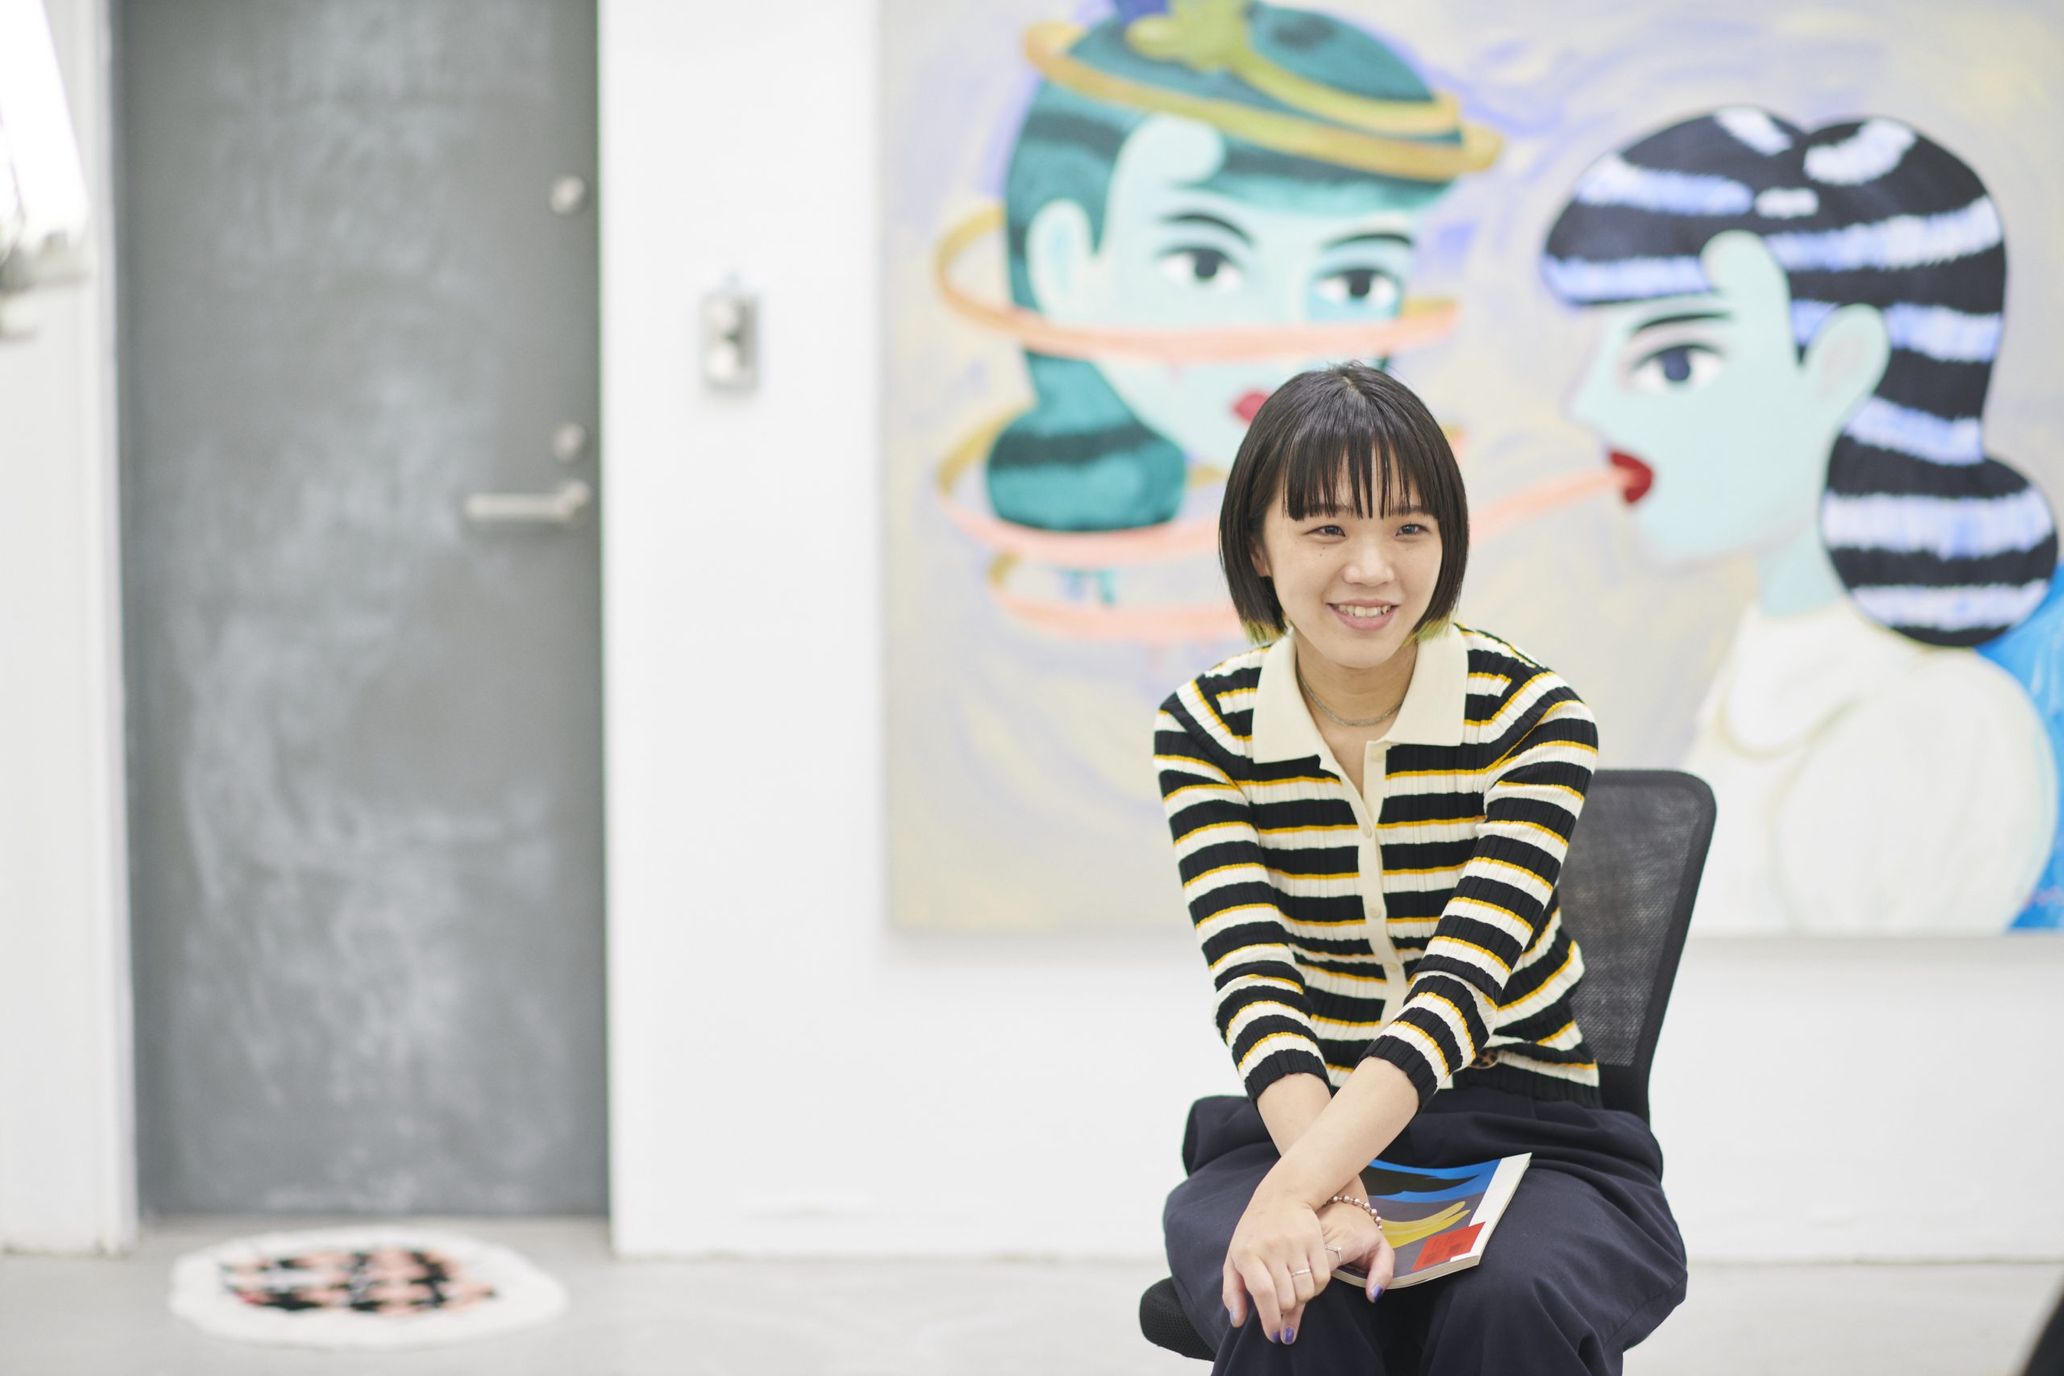 Artist Momoko Nakamura Establishes Her Own Style Through Painting What She Wants to Paint